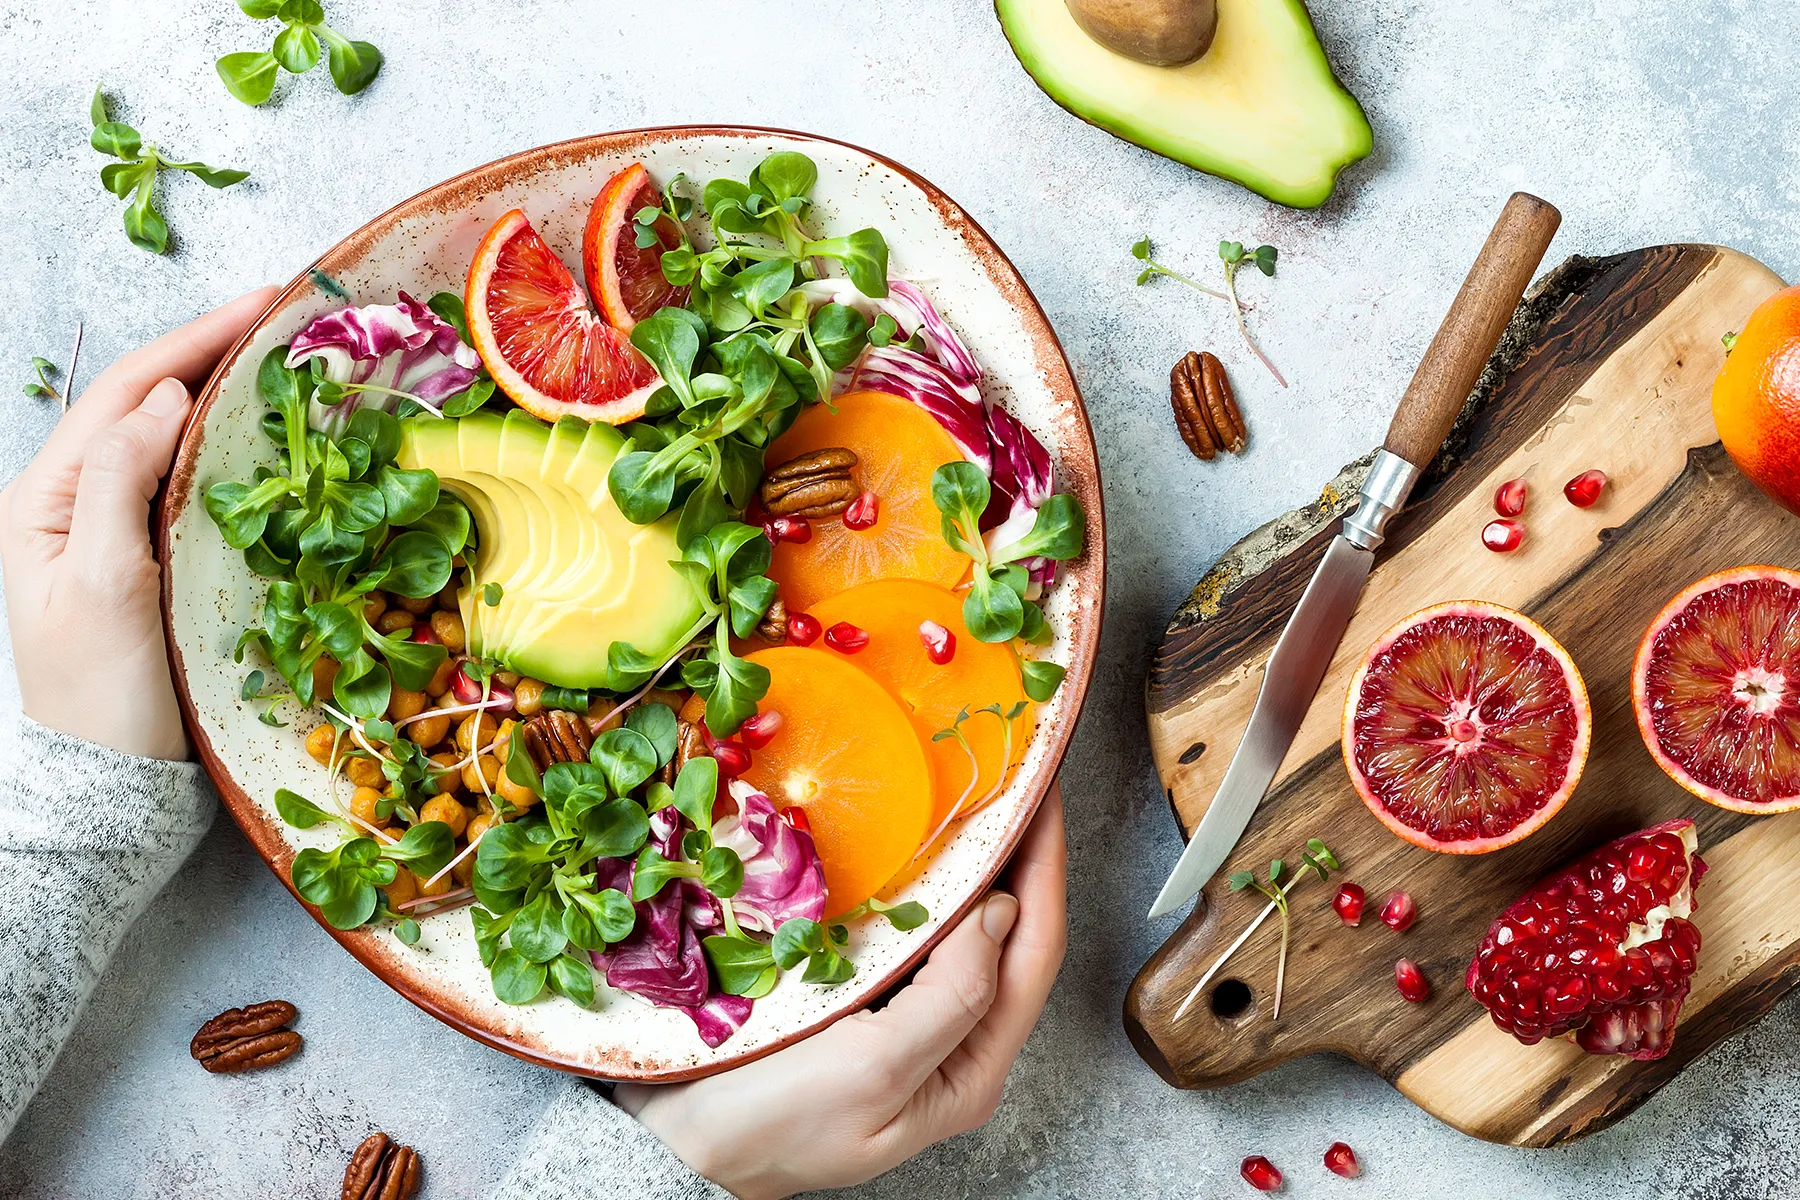 Nutrient-Rich Plant-Based Foods Linked to Healthy Heart